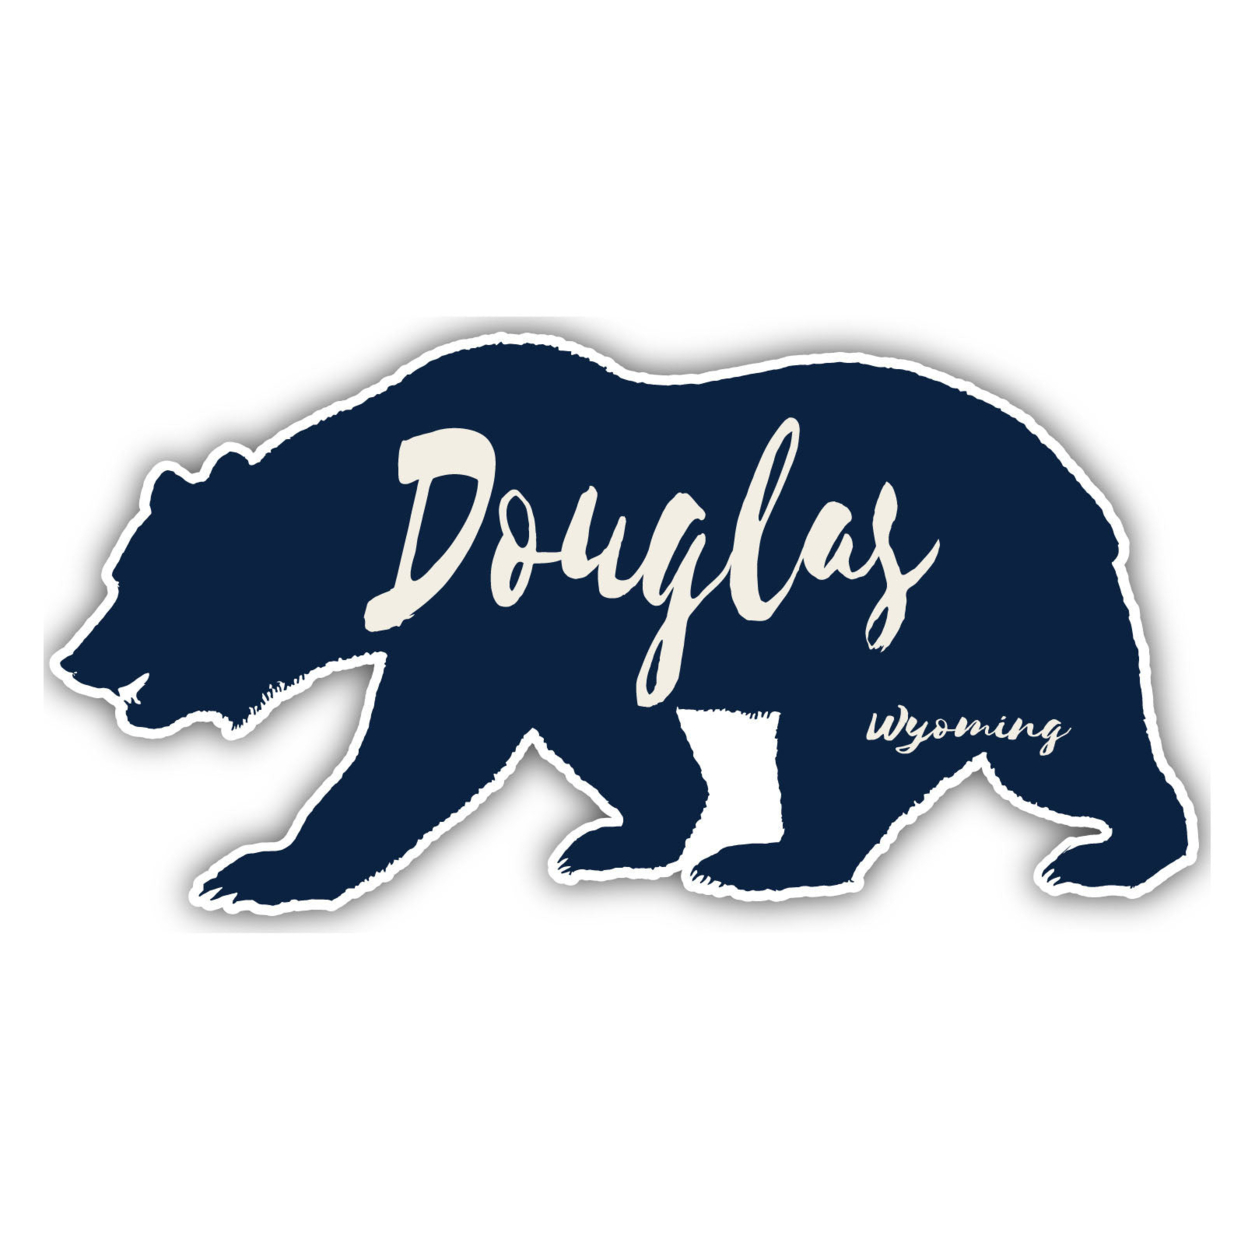 Douglas Wyoming Souvenir Decorative Stickers (Choose Theme And Size) - 4-Pack, 10-Inch, Great Outdoors